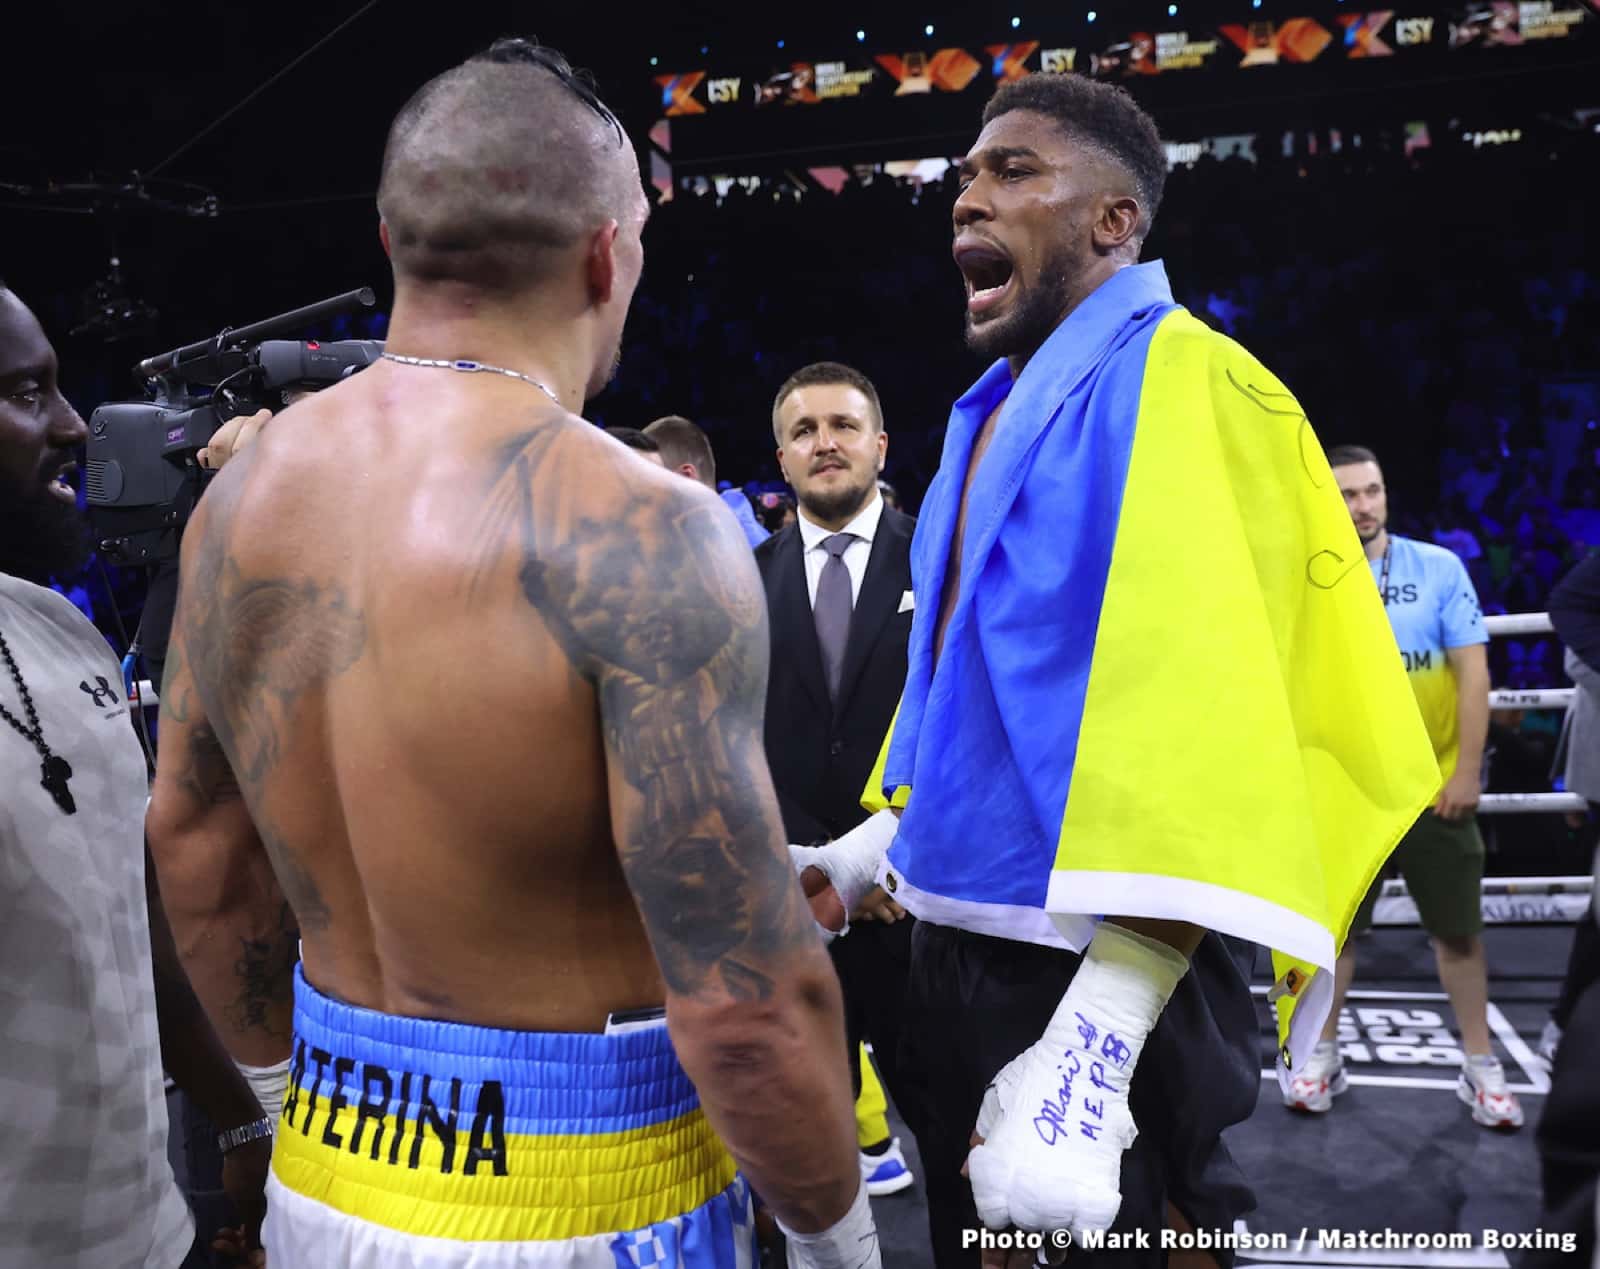 “Lack of respect”: Robert Garcia describes Joshua’s rant minutes after losing to Usyk